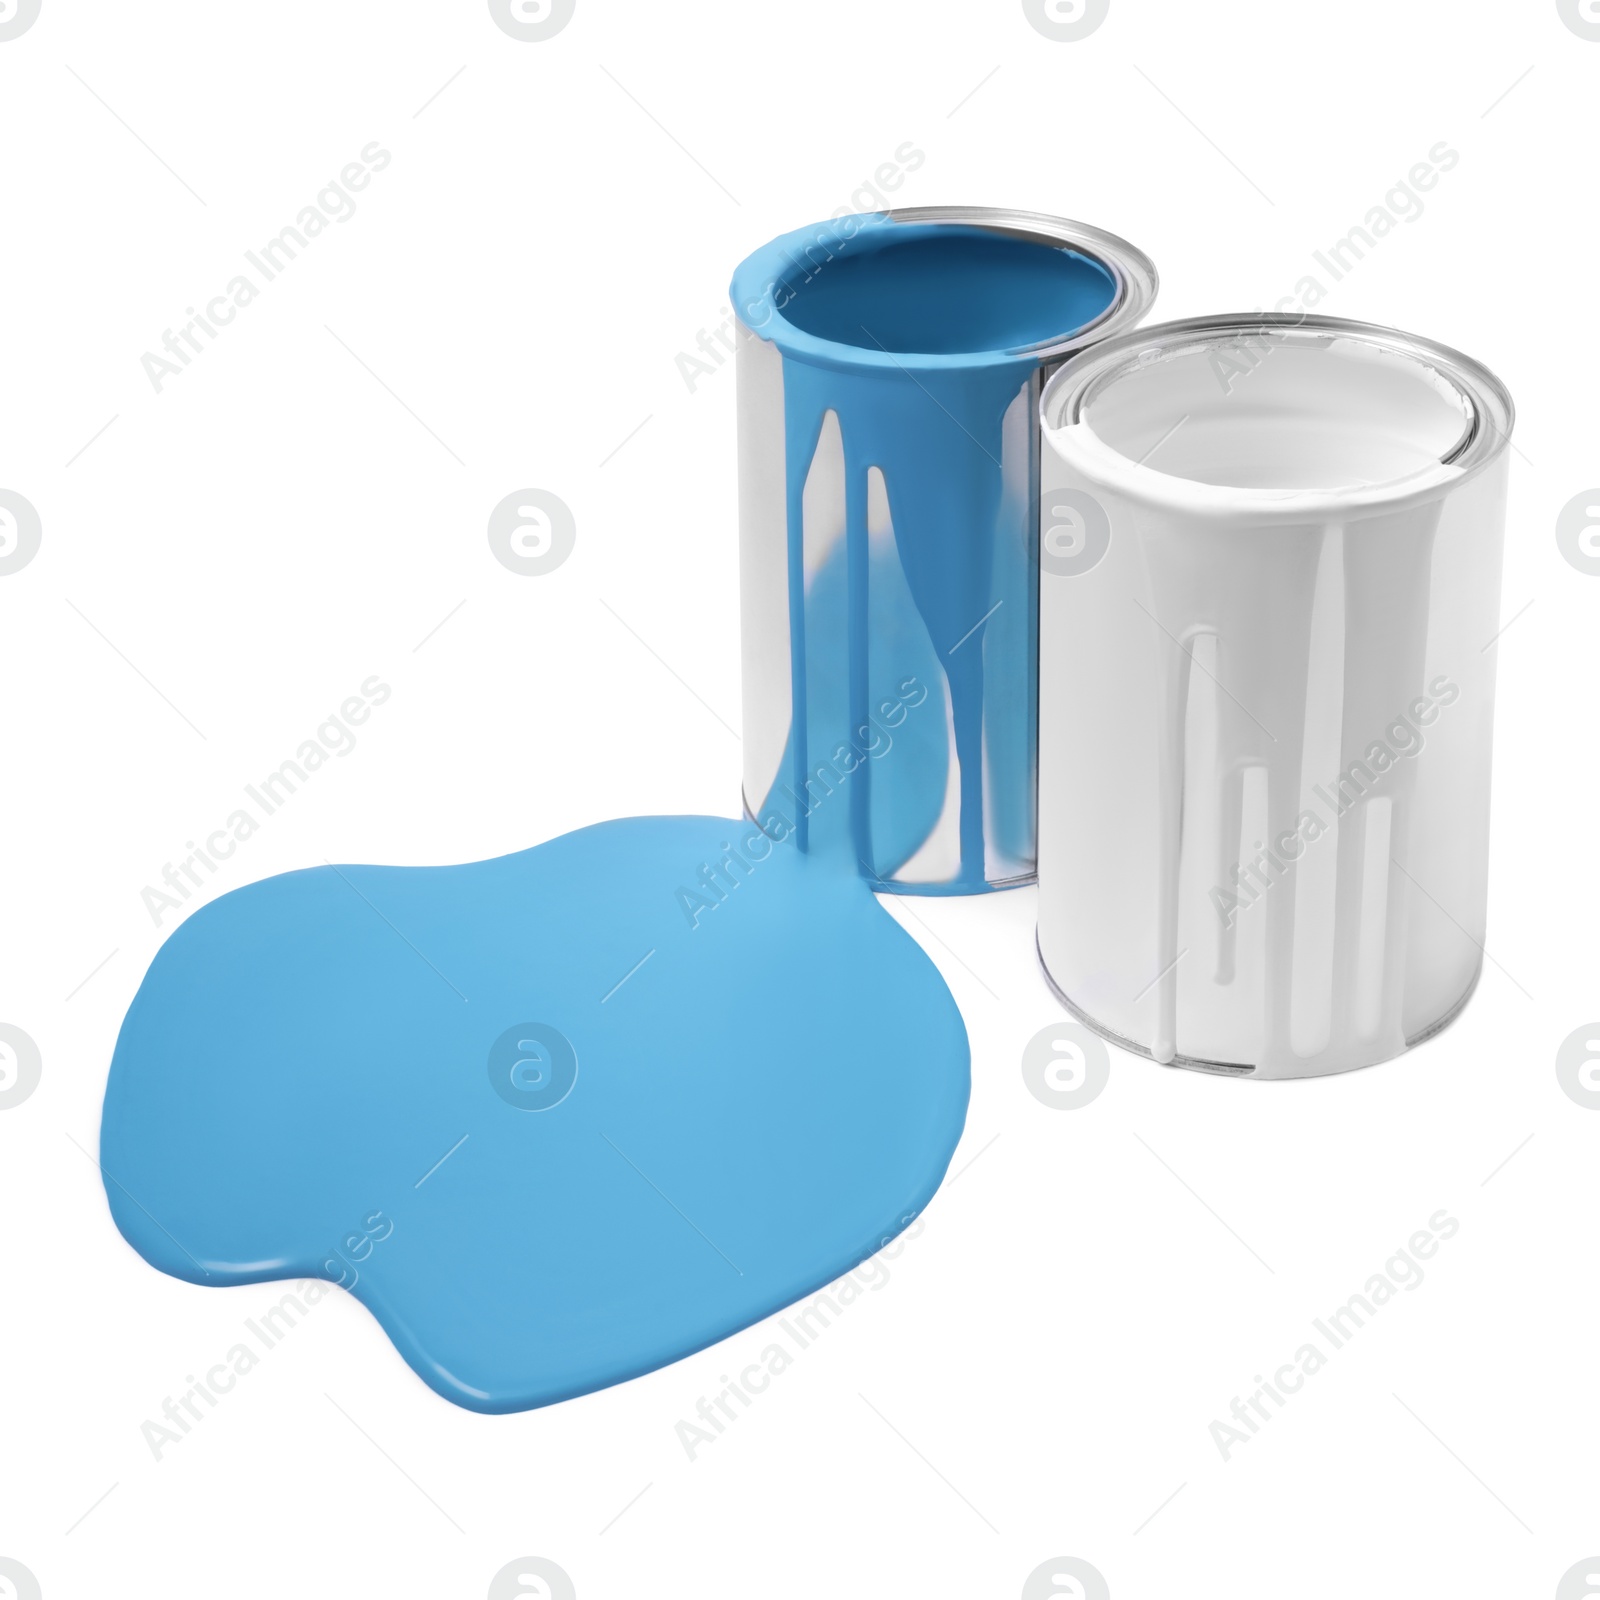 Photo of Spilled light blue paint and cans on white background